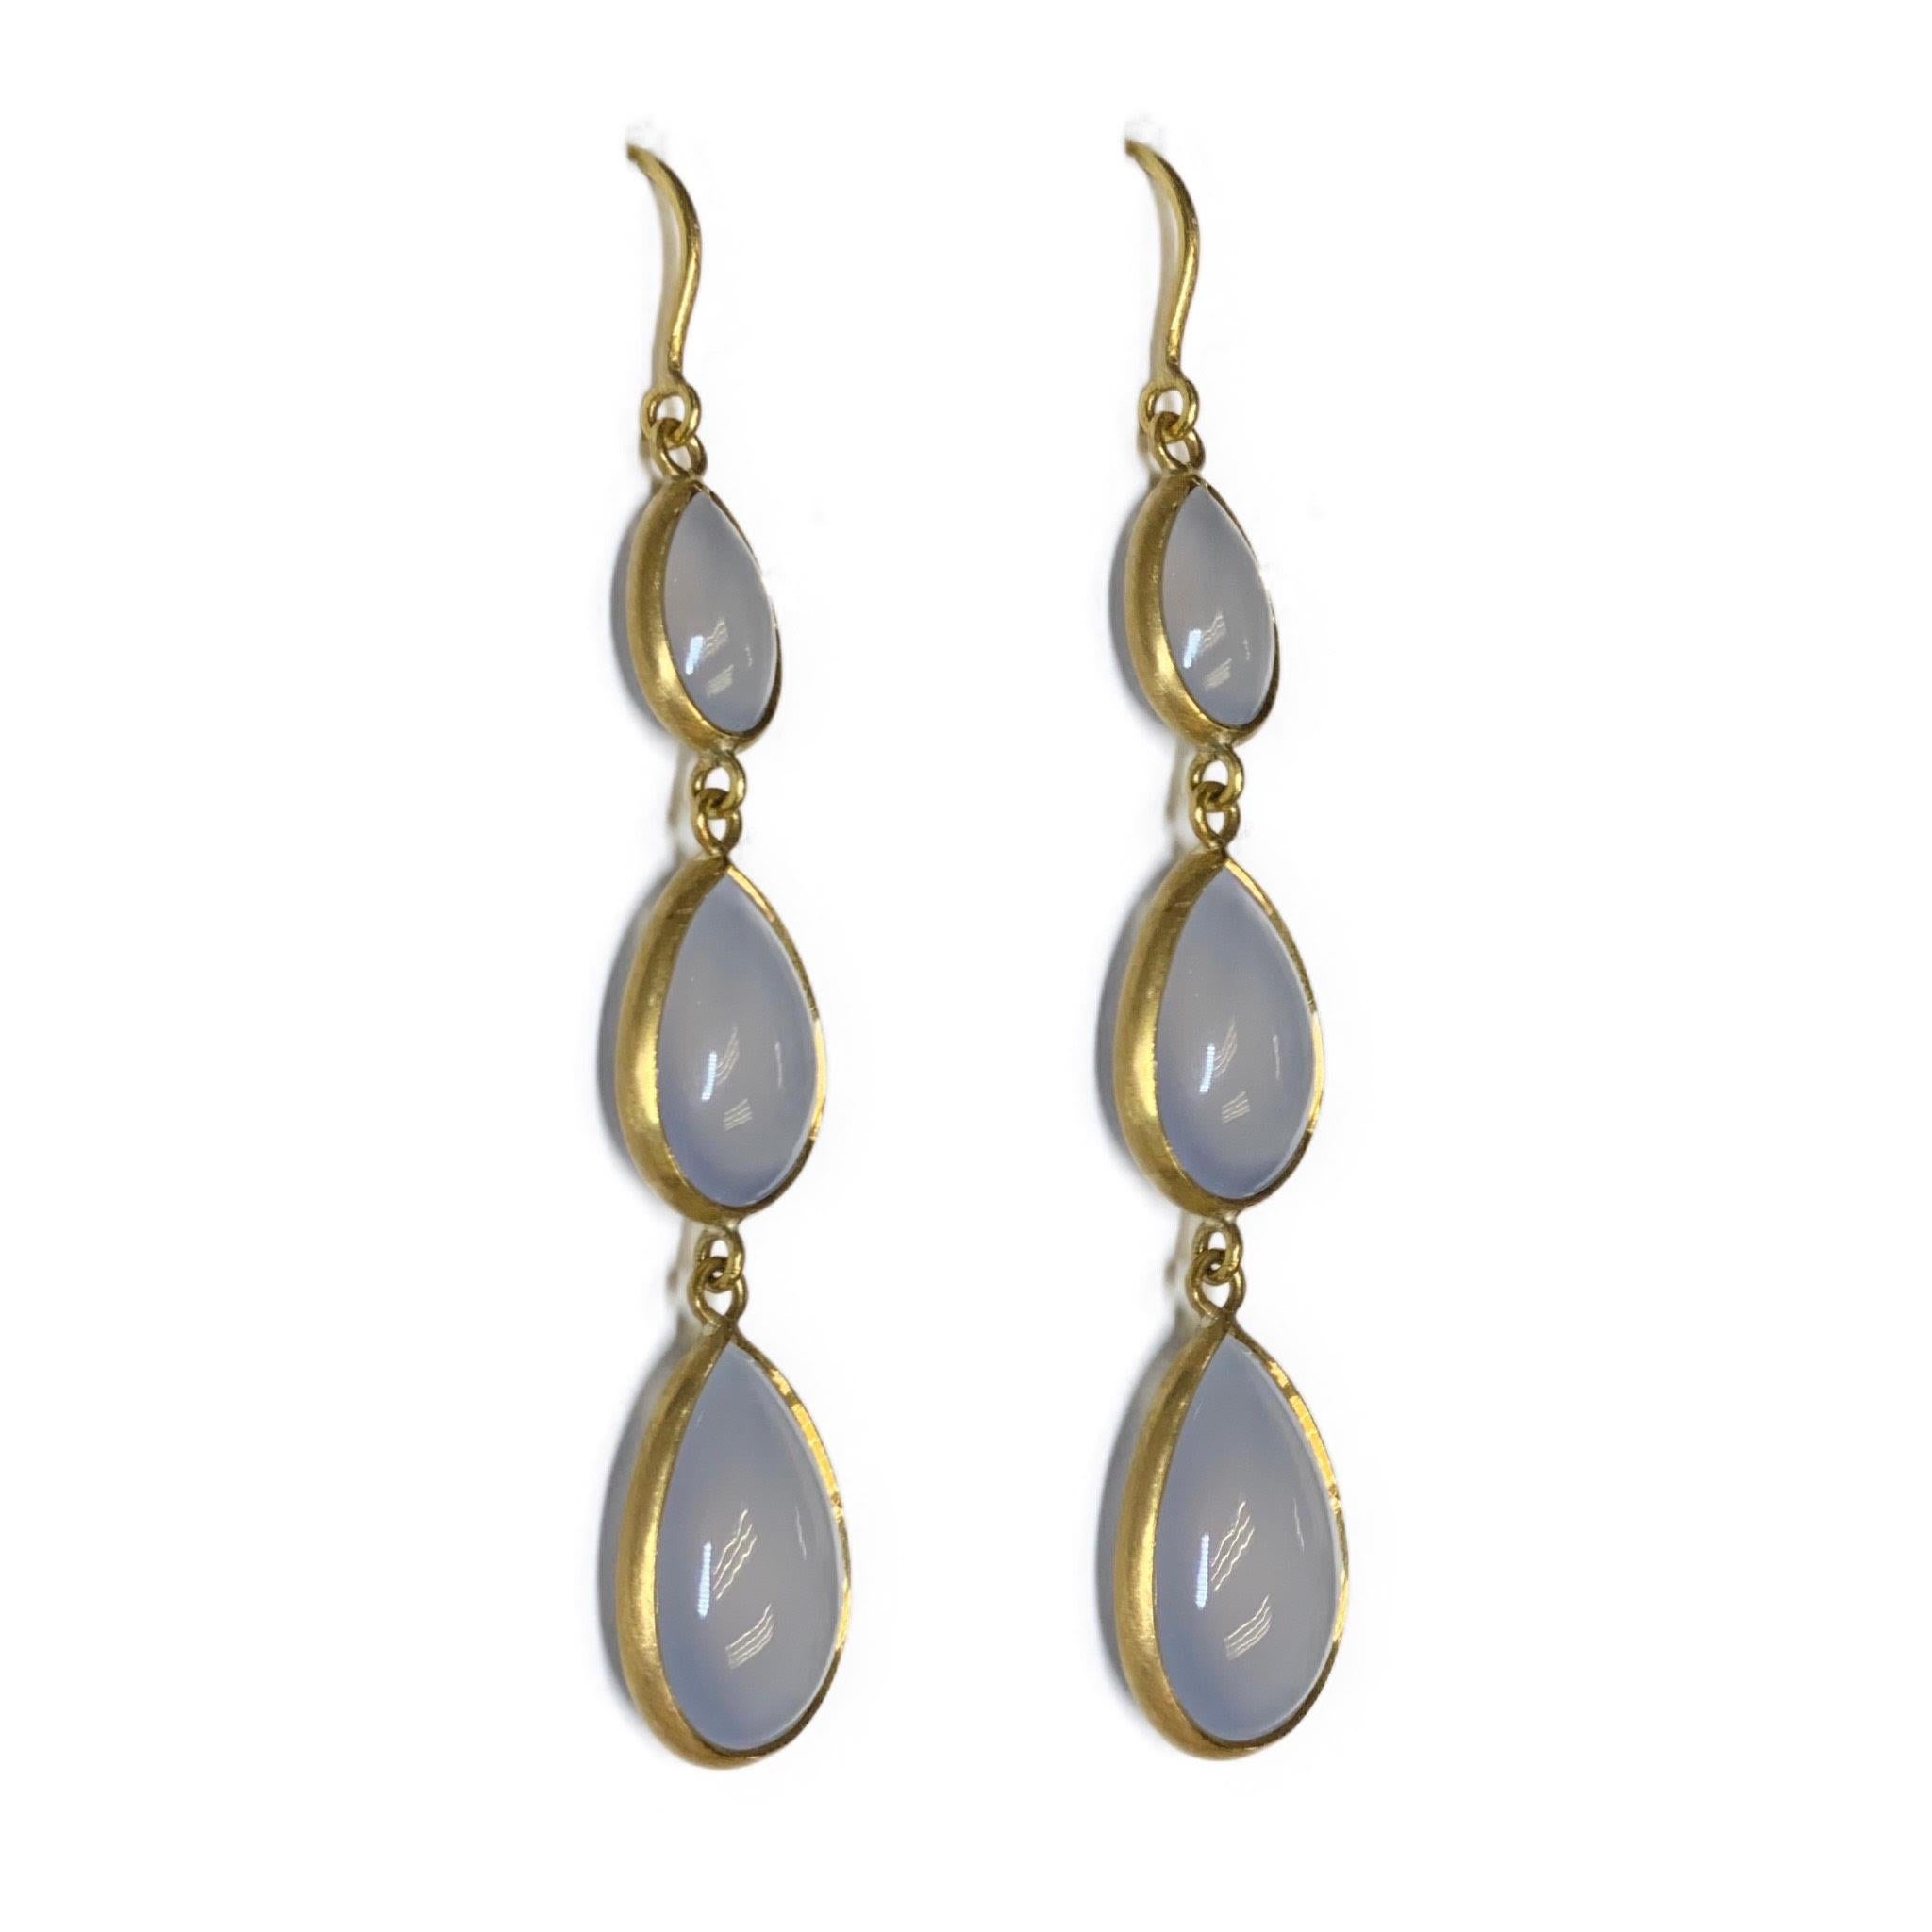 The custom-cut double sided Chalcedony drops are matched to perfection, and provide a sensuously soft silhouette when combined with the satin finished 22K gold. 
Chalcedony is a form of quartz. It is considered a powerful healing stone that can